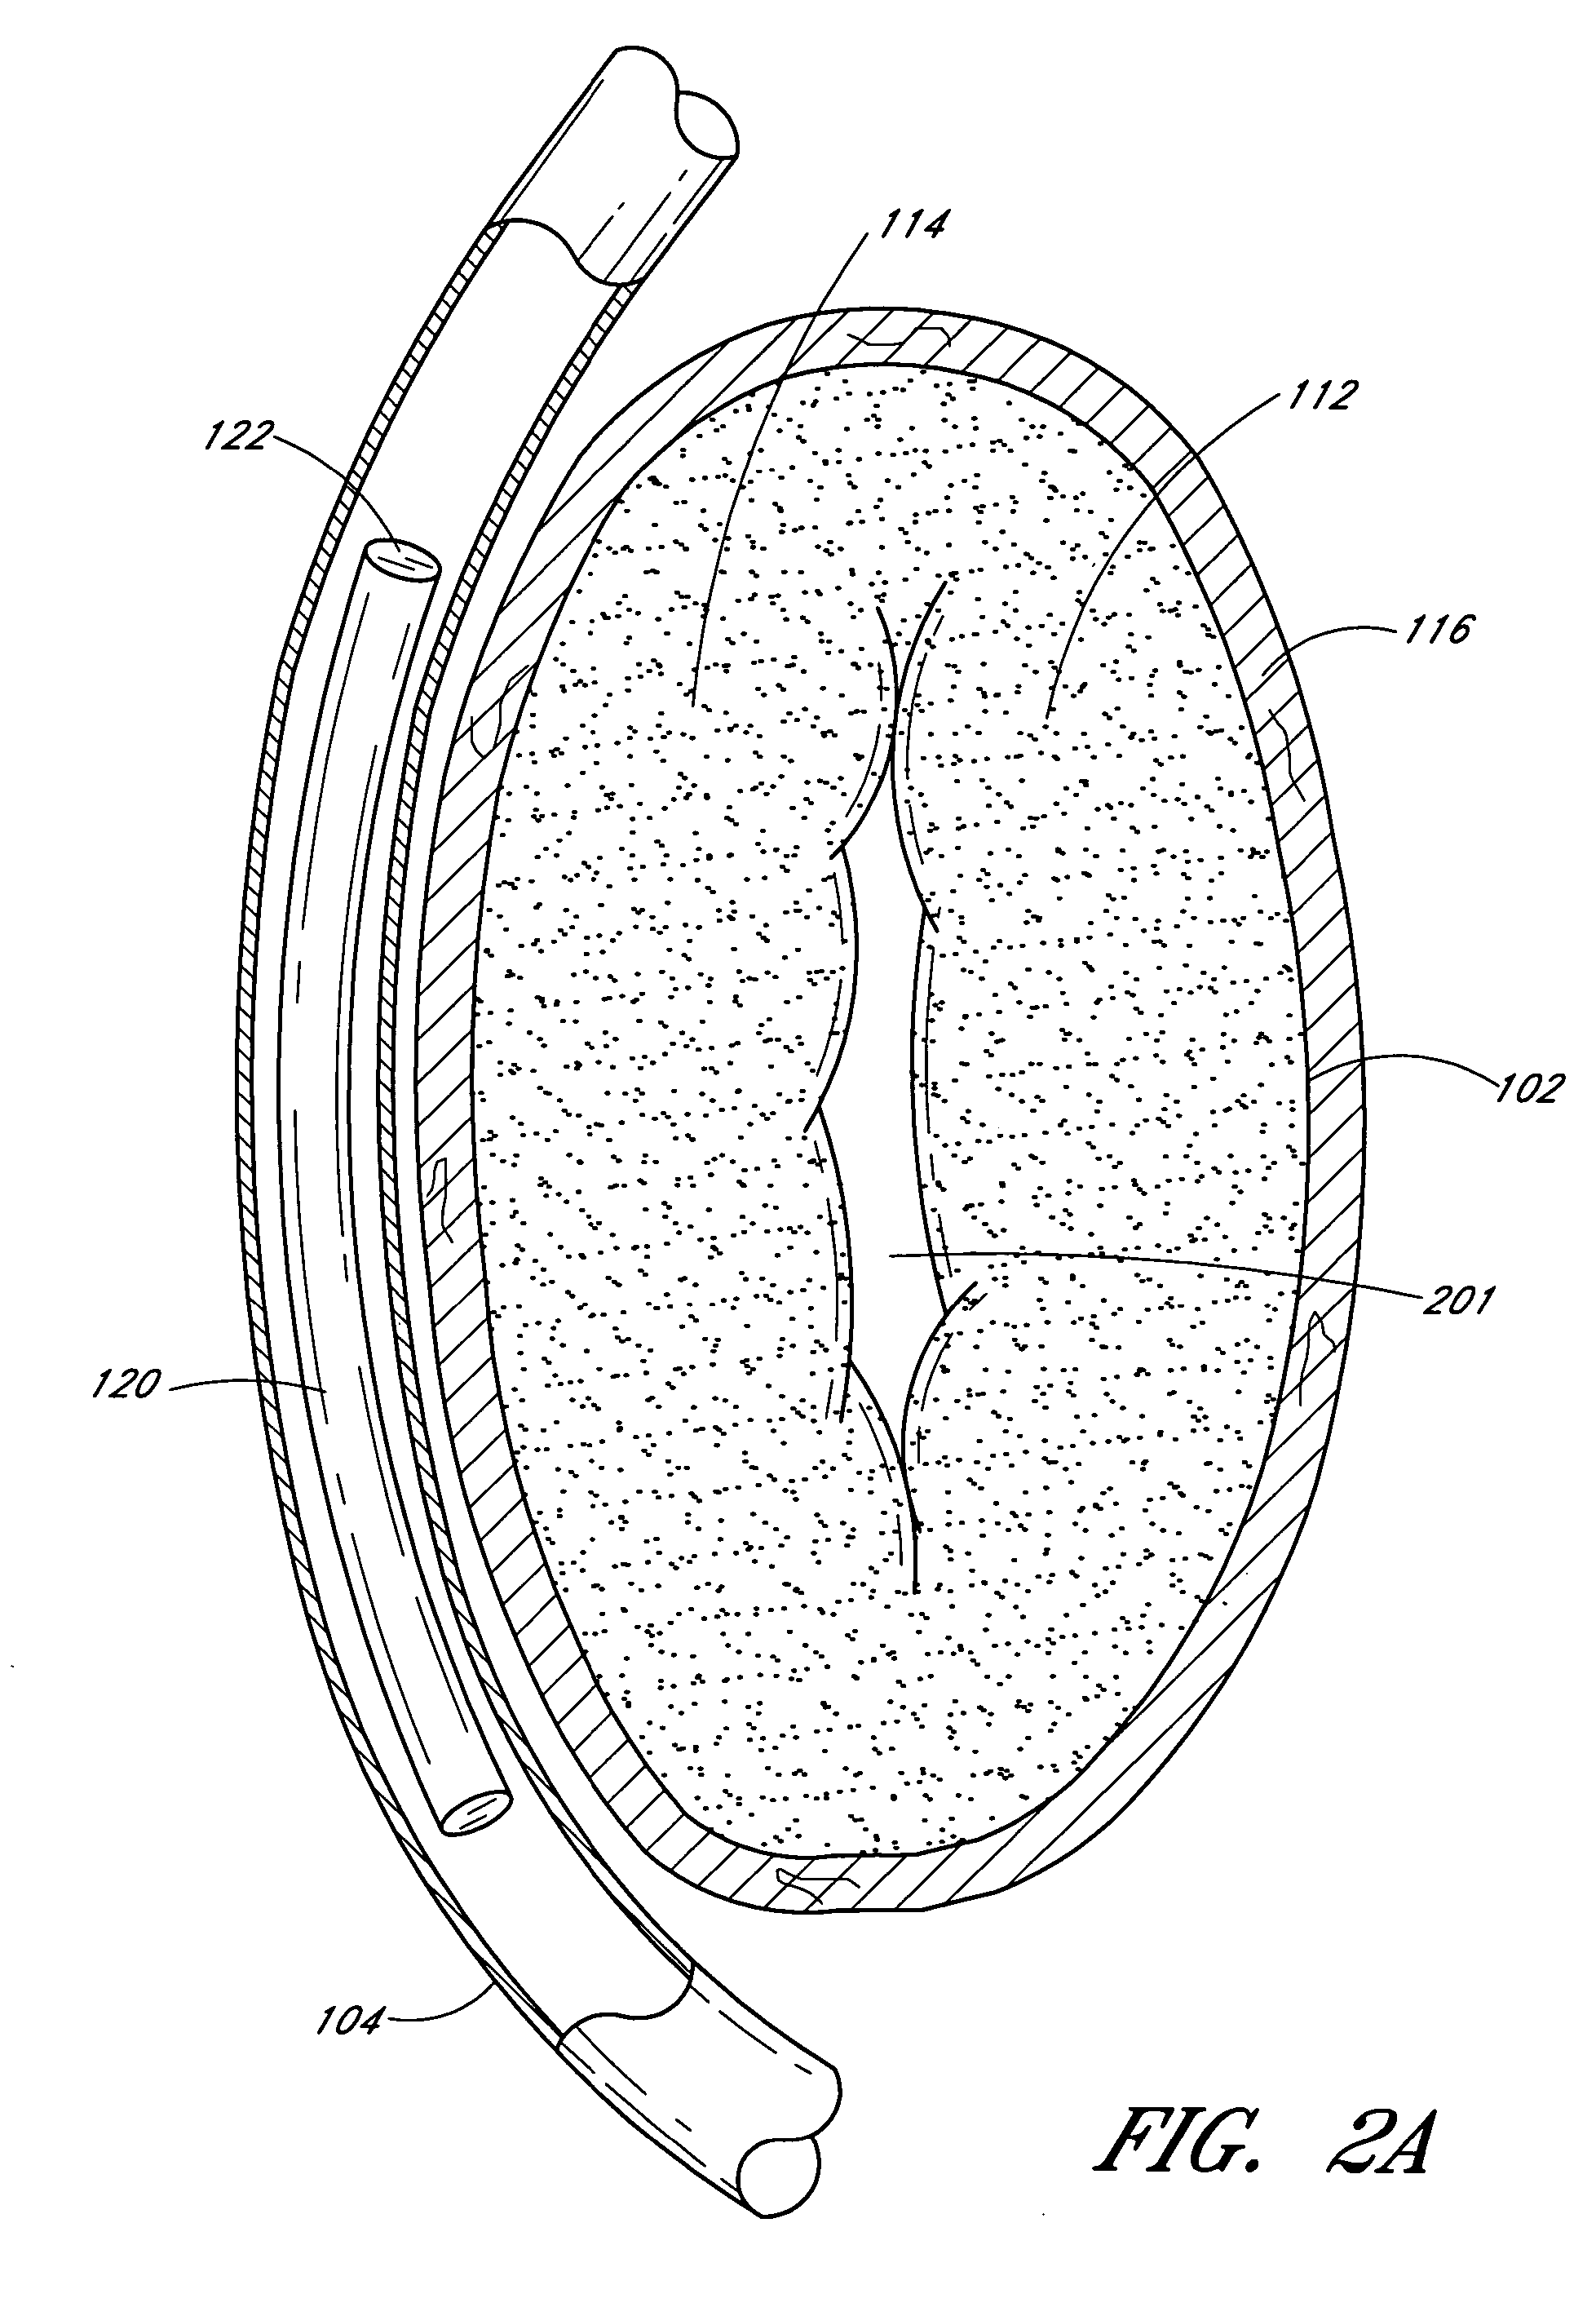 Dynamically adjustable implants and methods for reshaping tissue